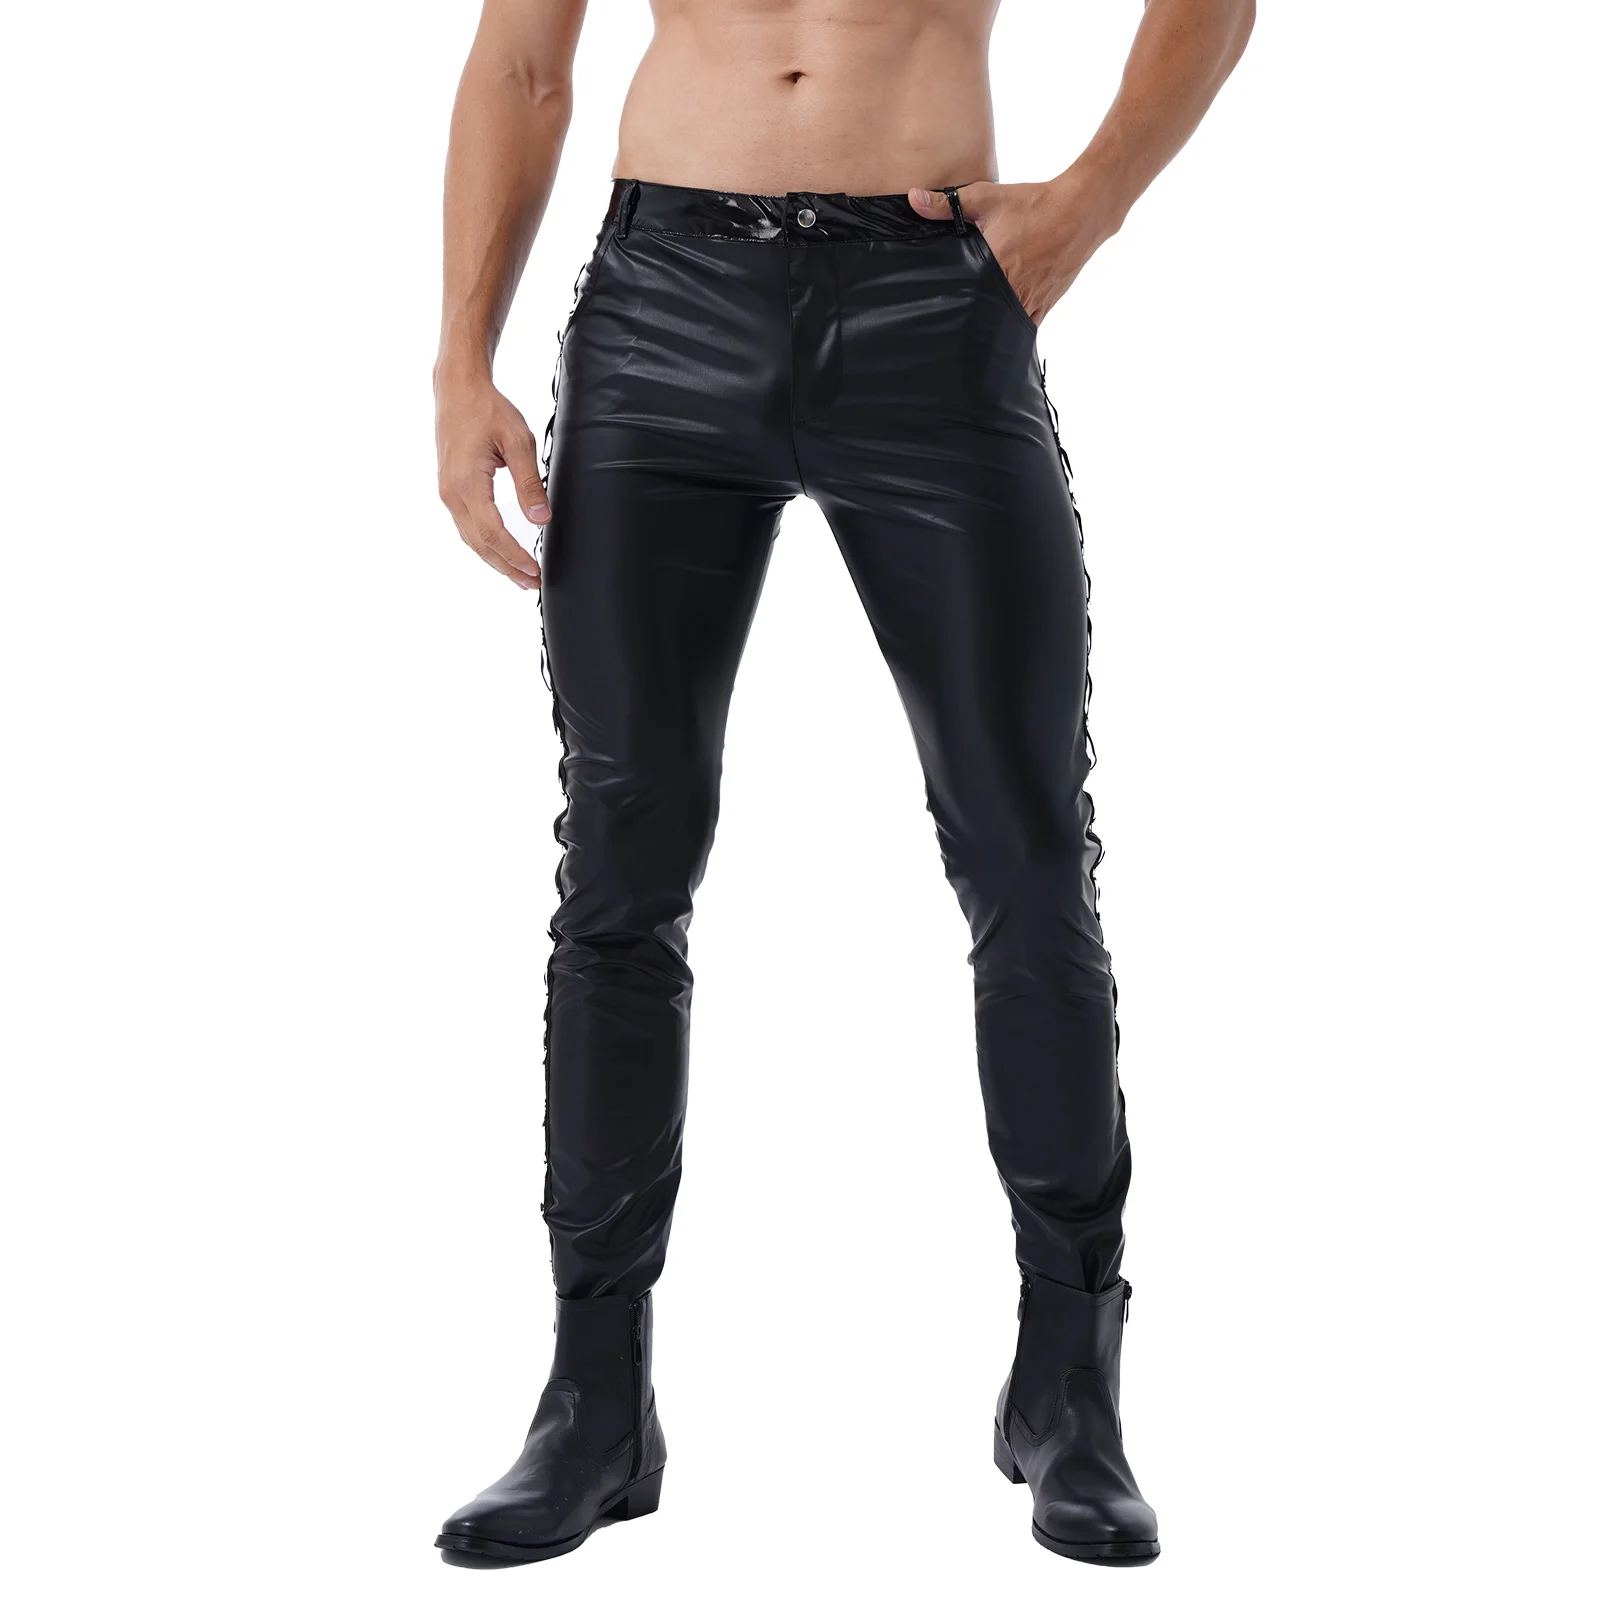 Men Skinny Faux Leather Low Waist Pencil Pants Fashion Tight Trousers Casual Workout Leggings Pole Dance Costume for Nightclub